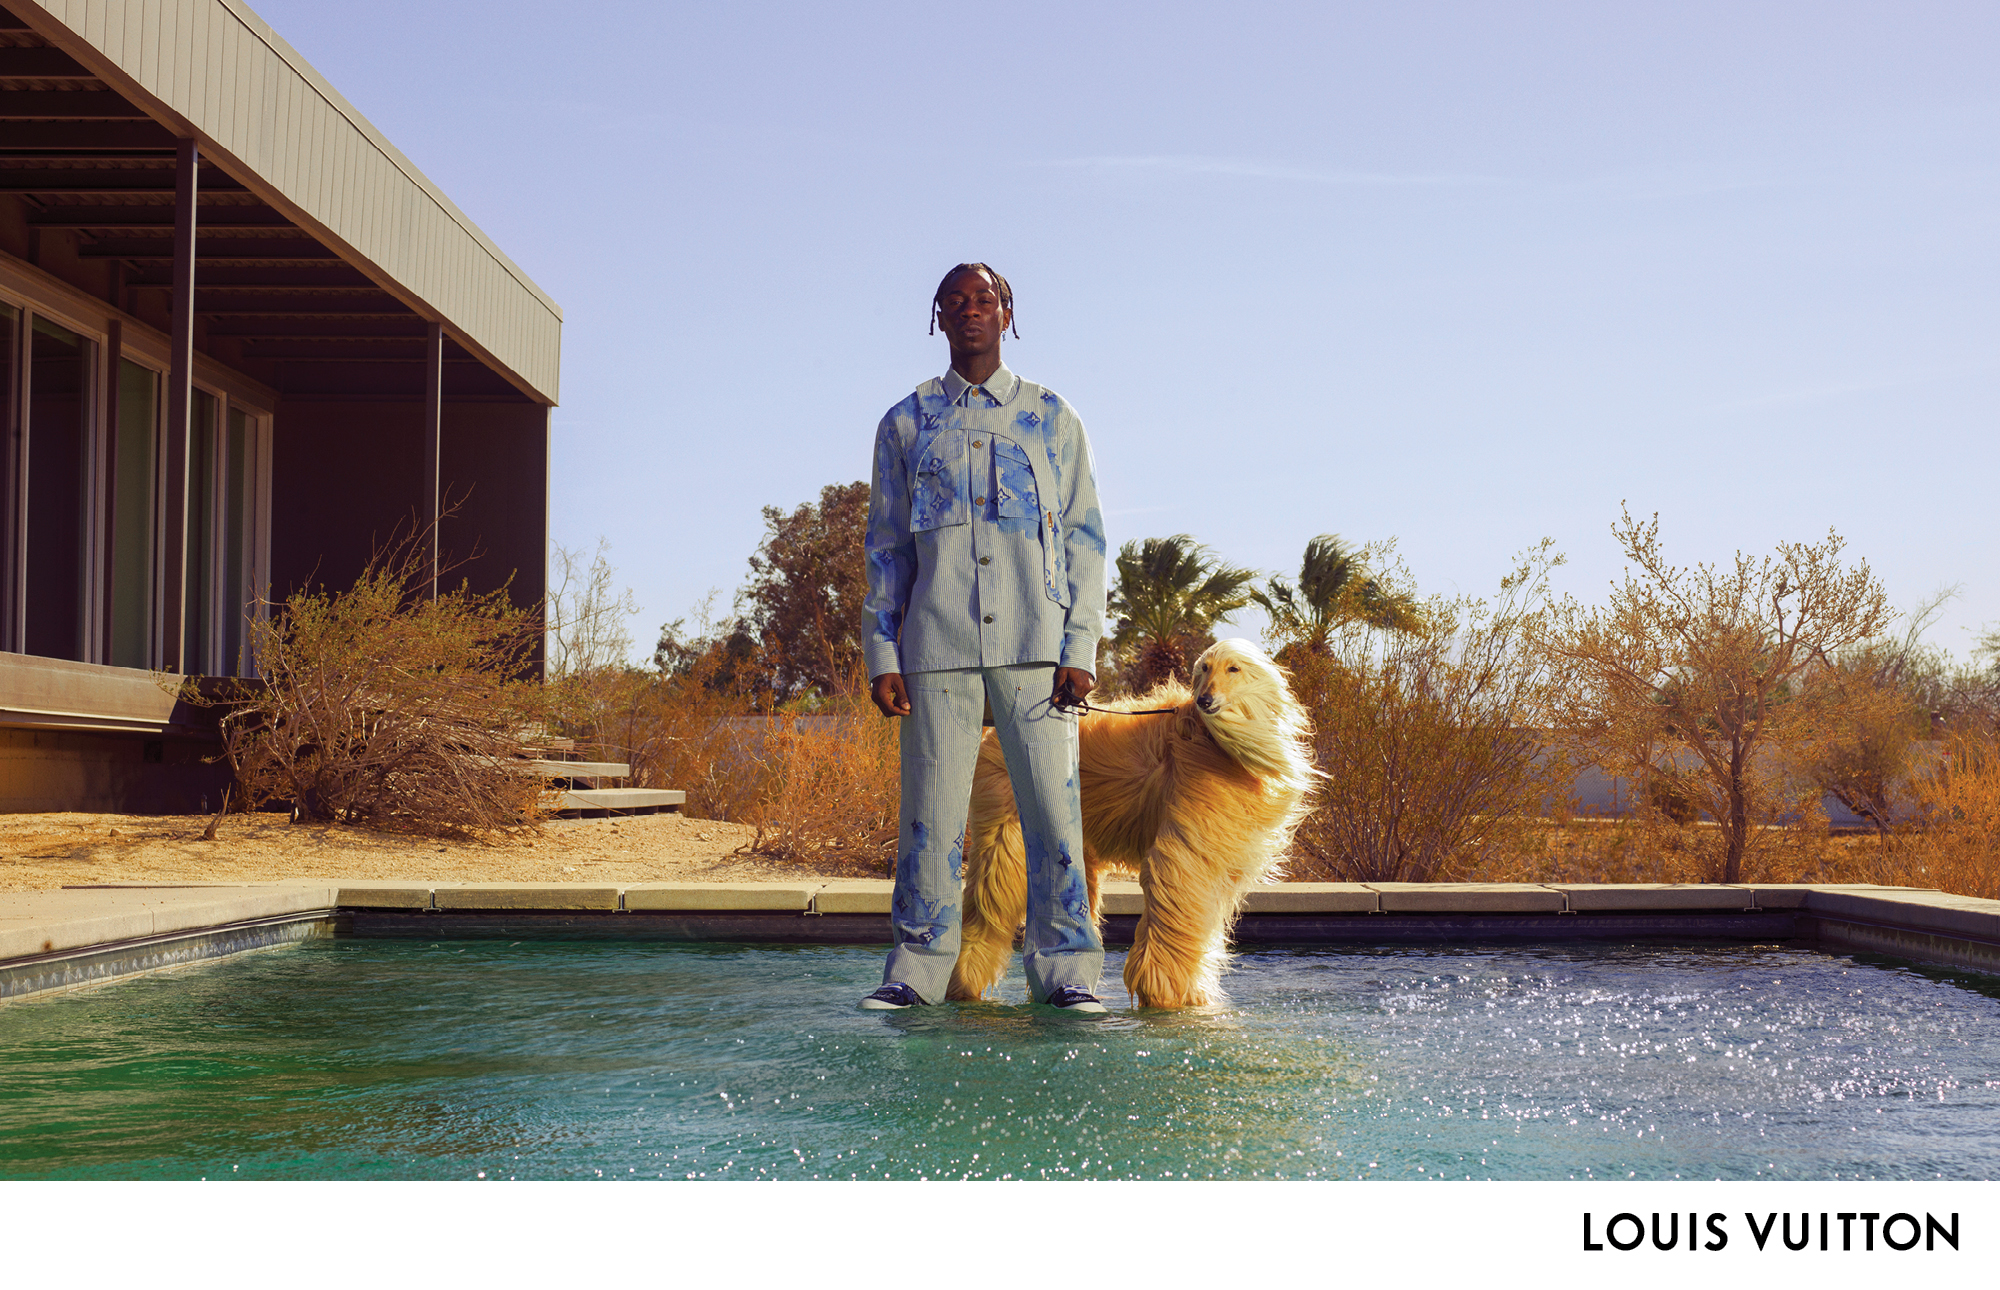 Louis Vuitton Embraces a Cool Stylish Summer – The Fashionisto